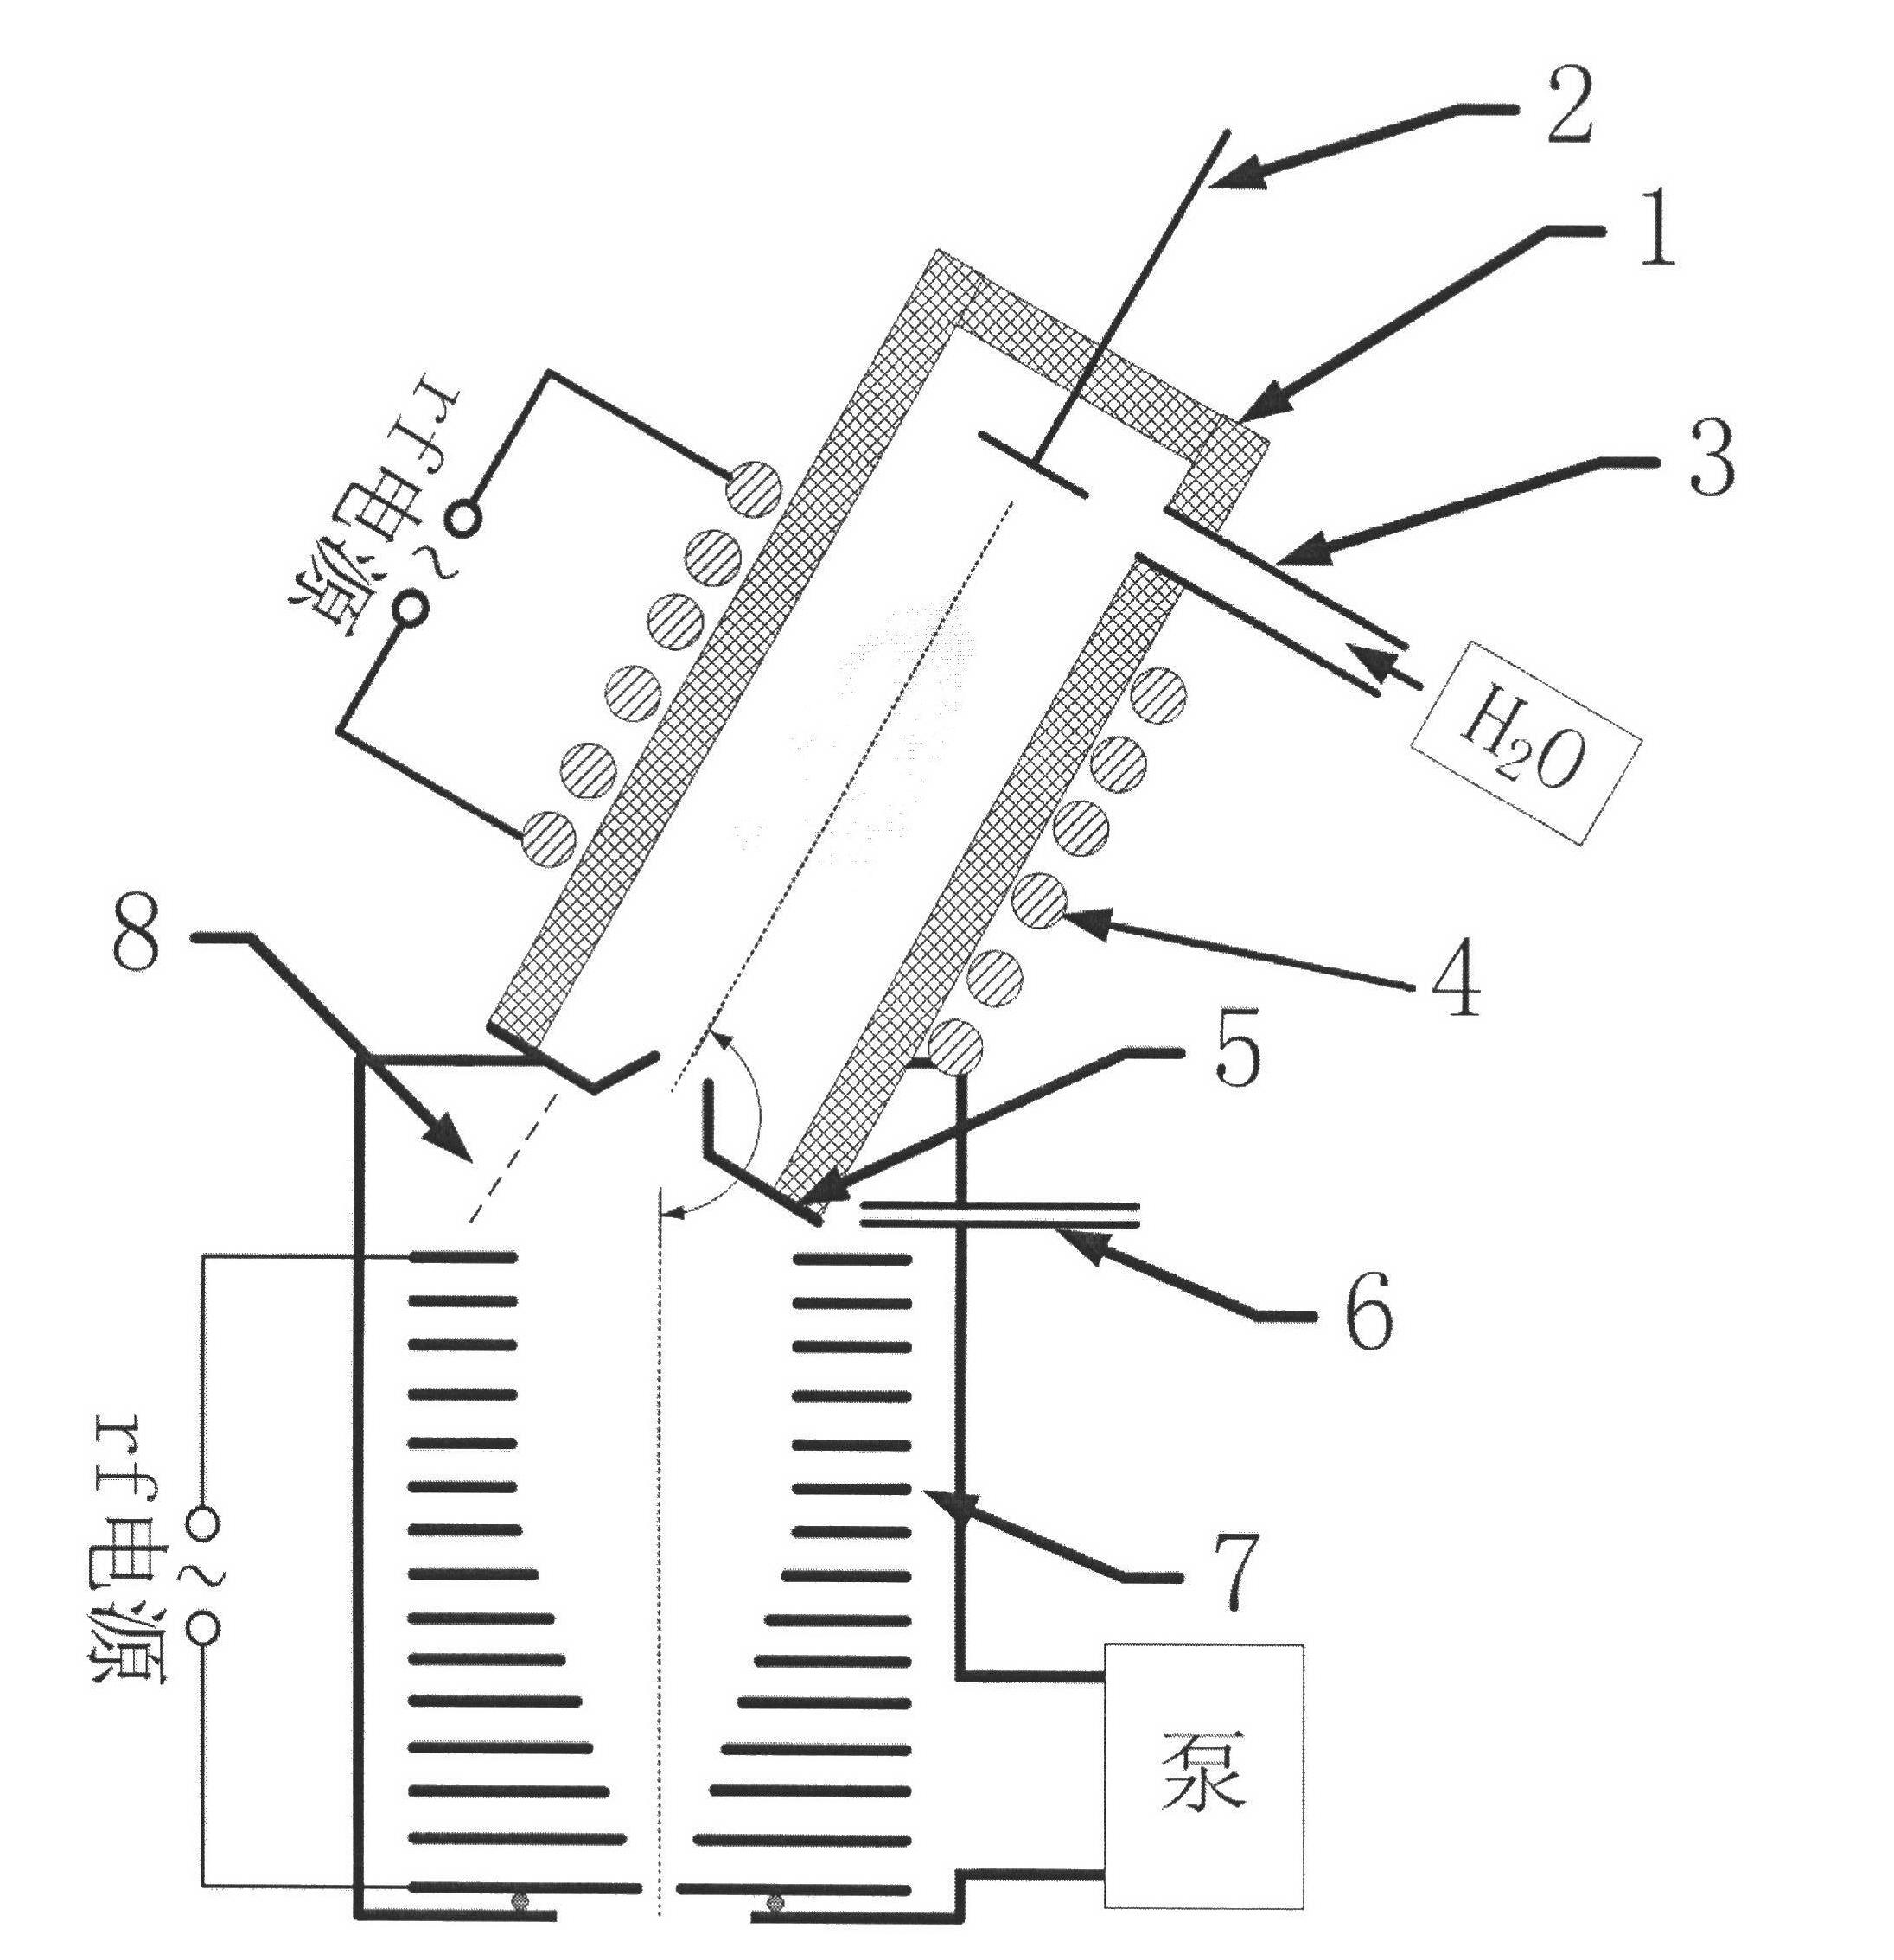 Ion source of proton transfer mass spectrometer